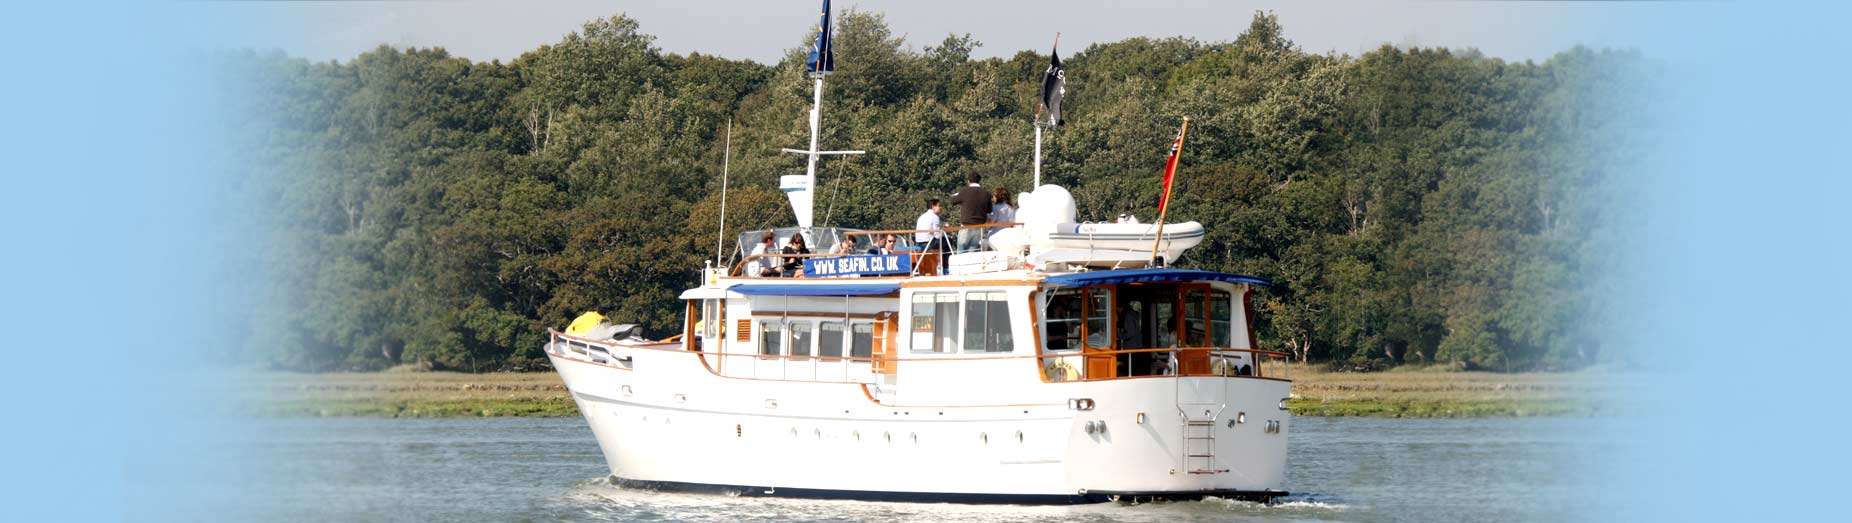 Seafin - Yacht Charter Southampton & Boat hire in United Kingdom England The Solent Southampton Southampton 2